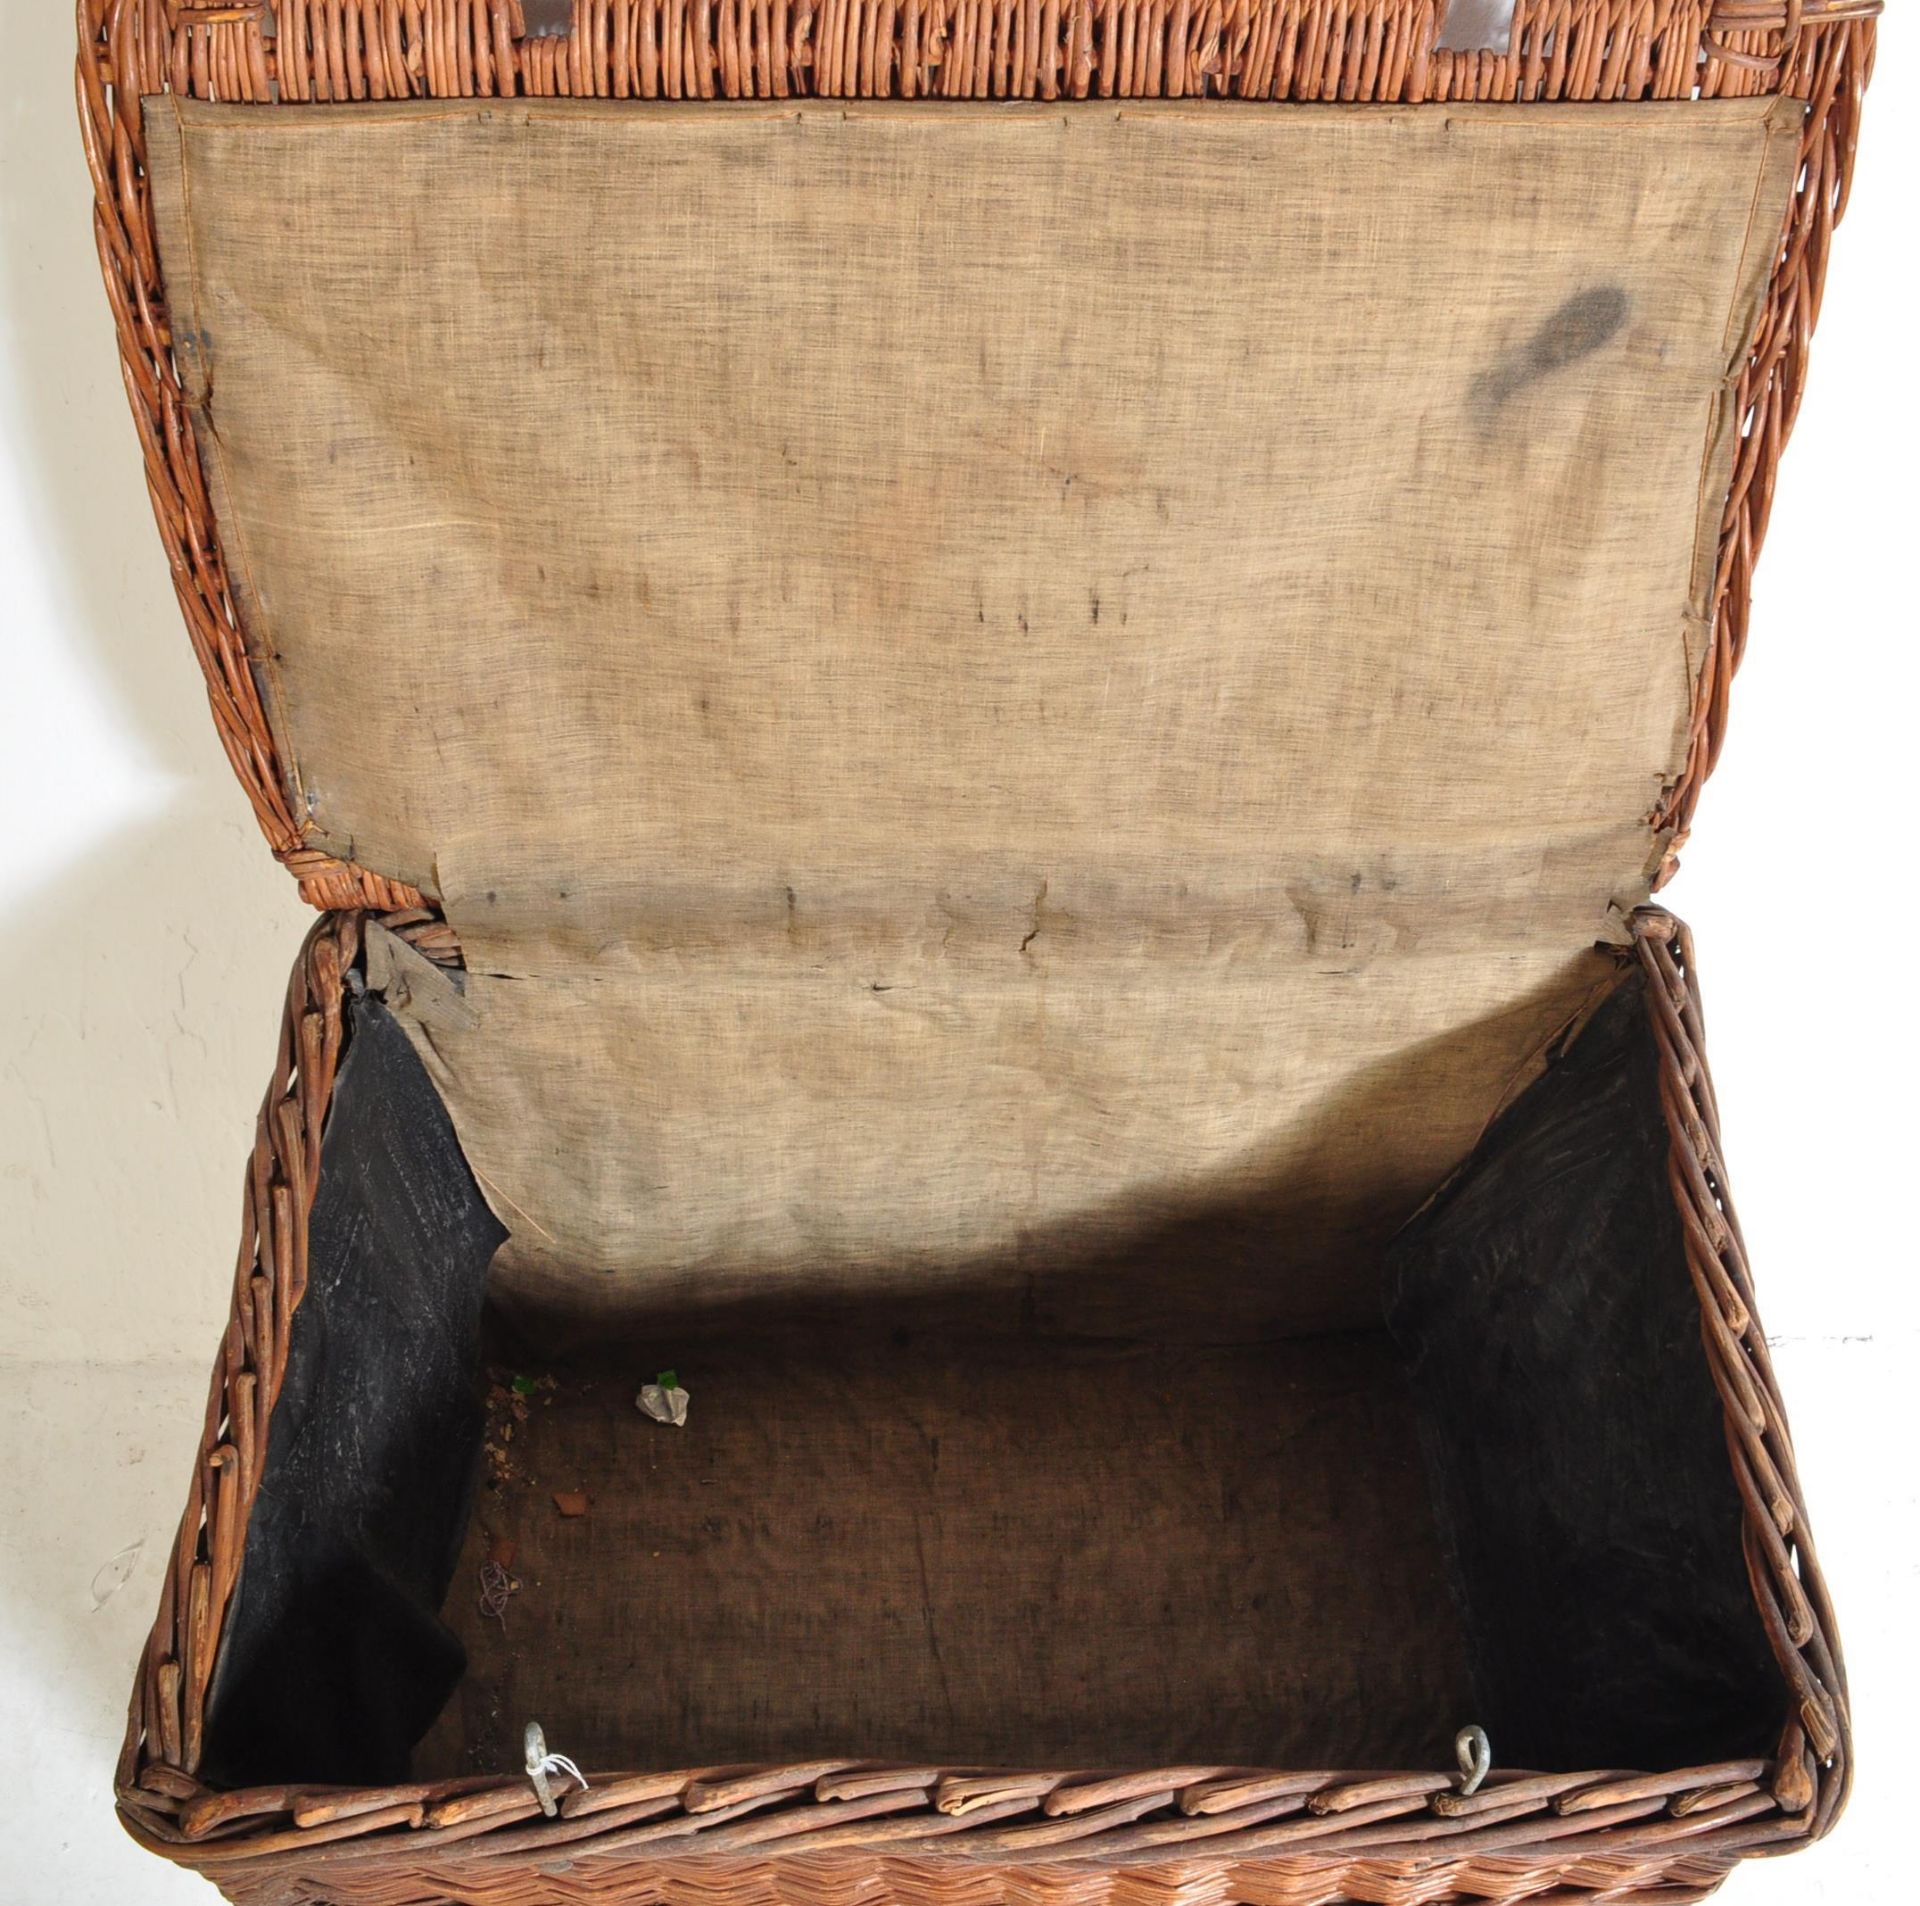 LARGE EARLY 20TH CENTURY WICKER LAUNDRY BASKET - Image 5 of 5